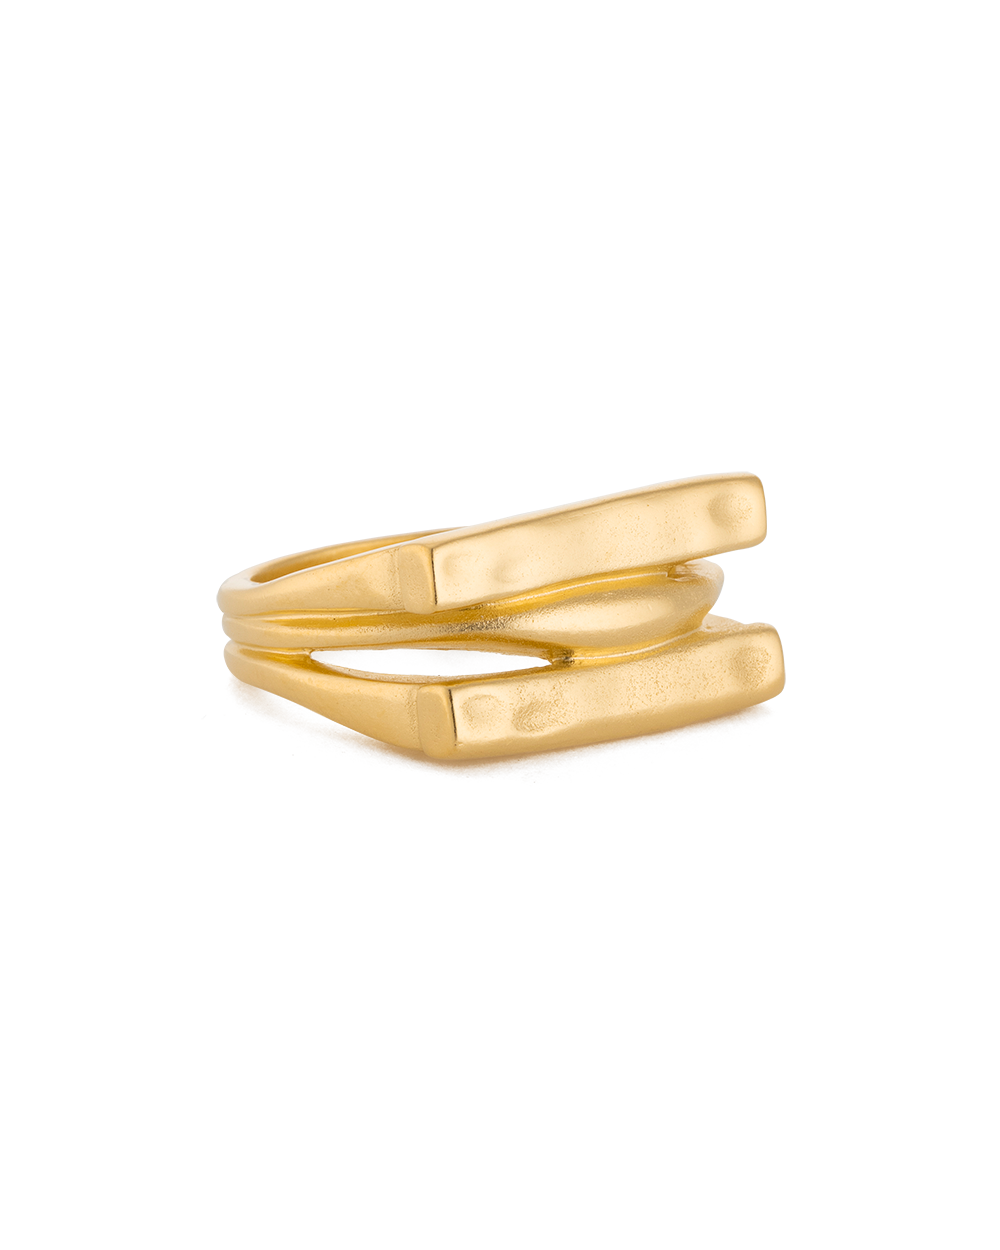 ELEMENTS RING (18K GOLD PLATED) - IMAGE 7